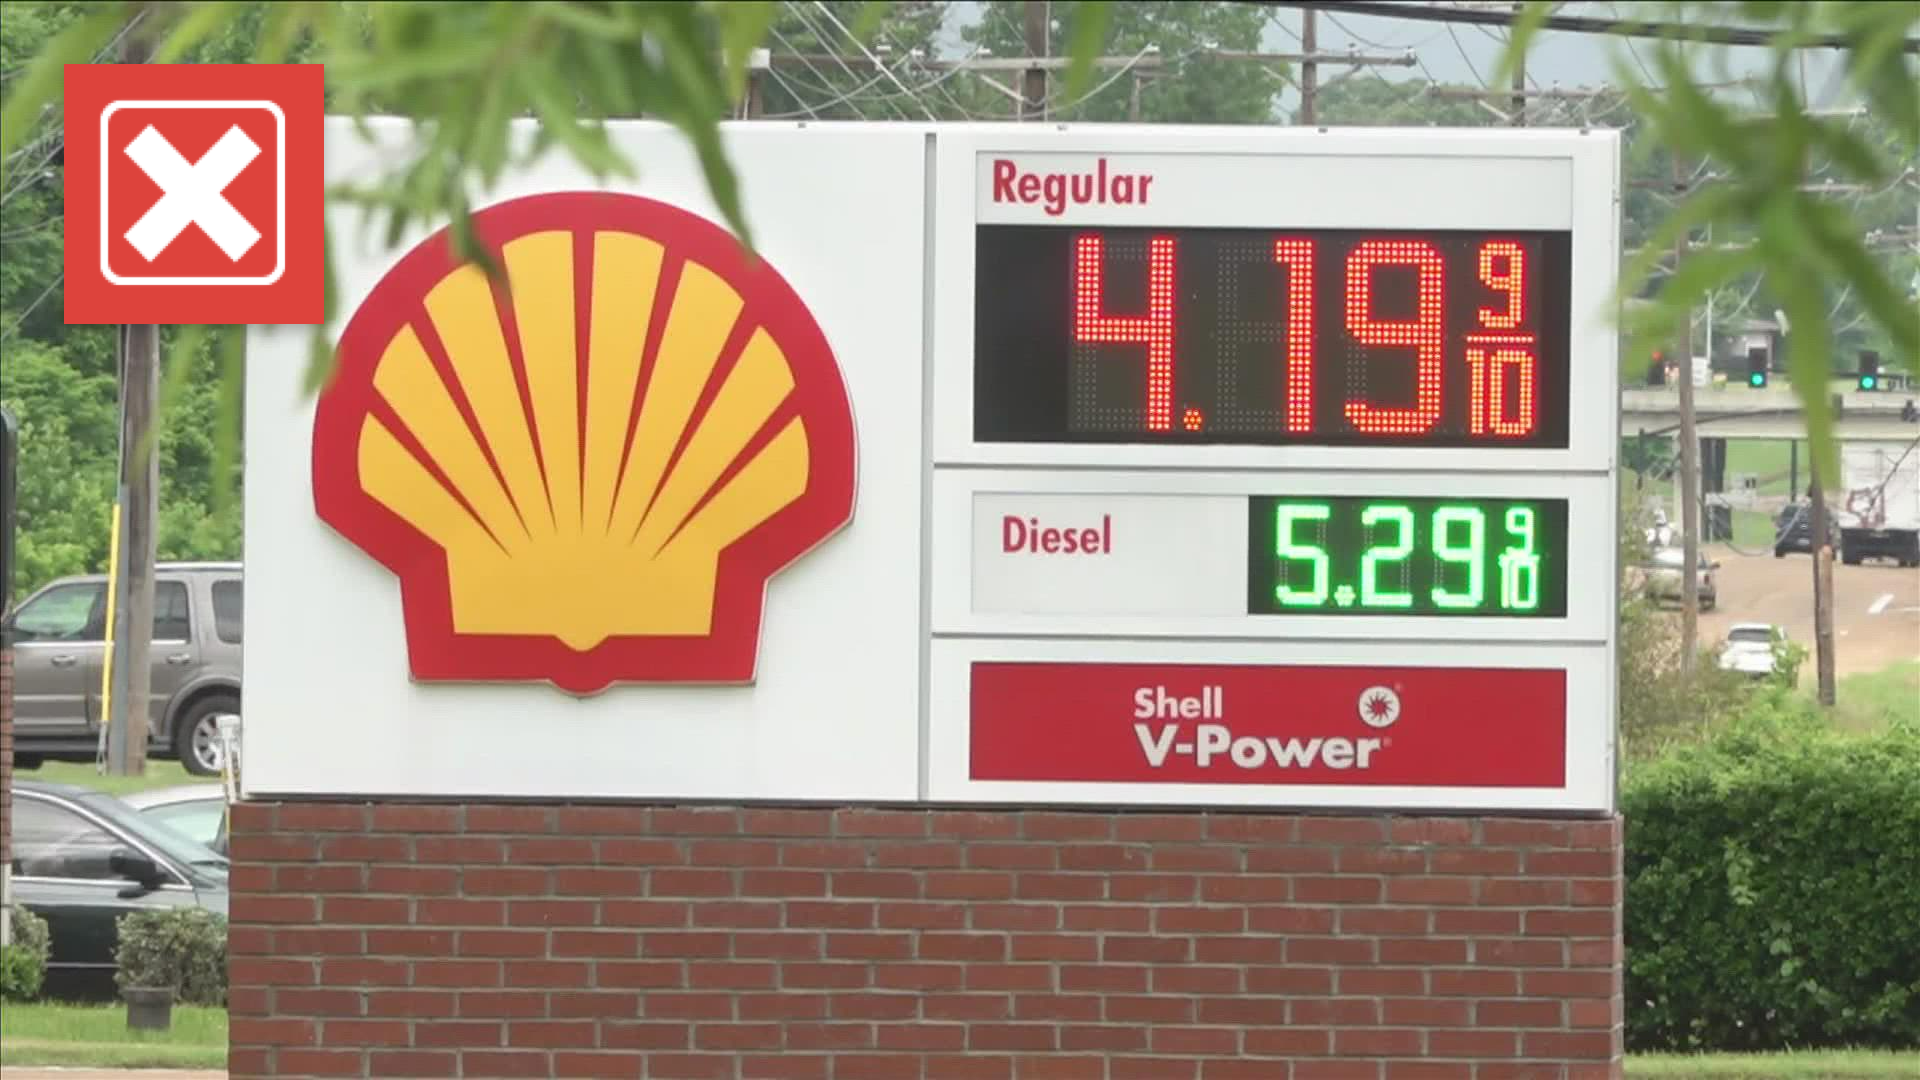 ABC24 talked to several business owners on why they also don't like it when gas prices rise.